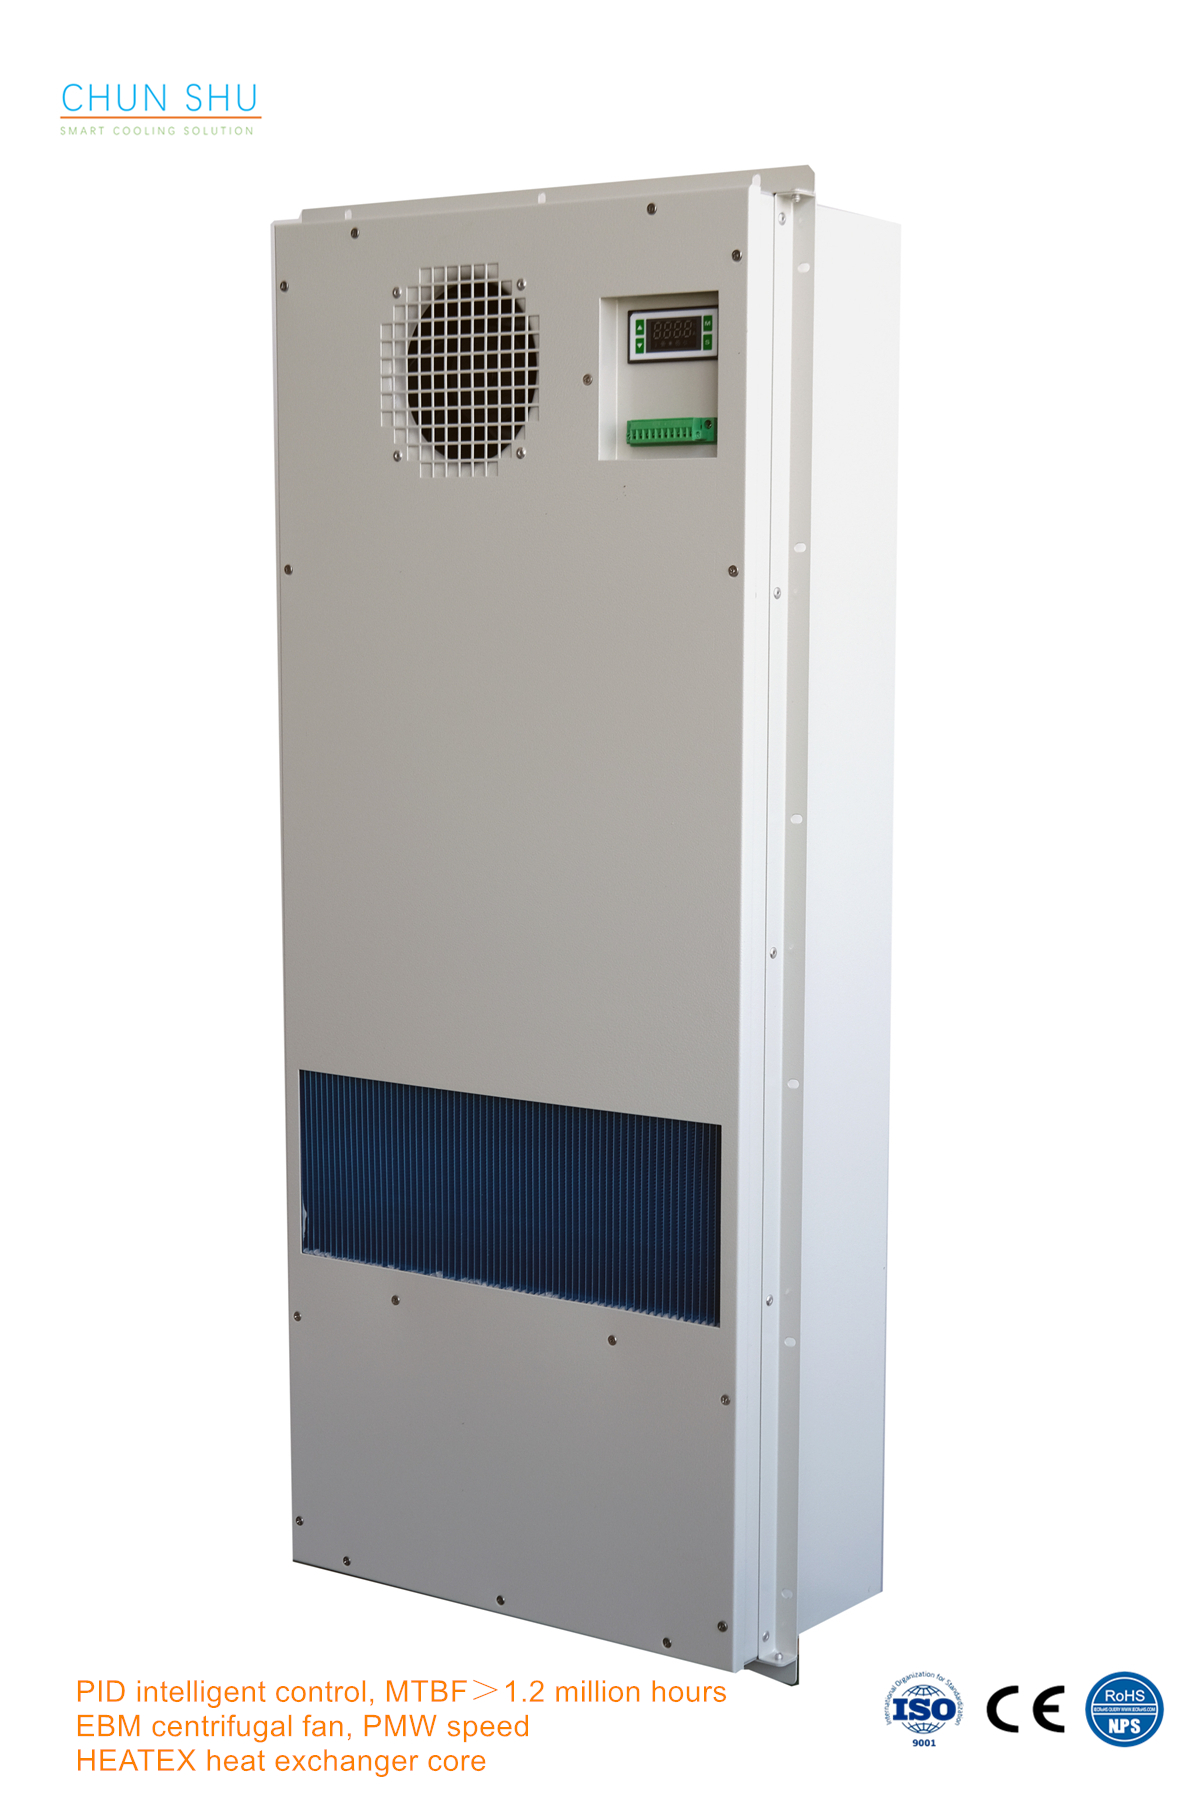 100W/K DC Powered Telecom Cabinet Heat Exchanger,enclosure Cooling,Outdoor Cabinet Refrigeration Equipment